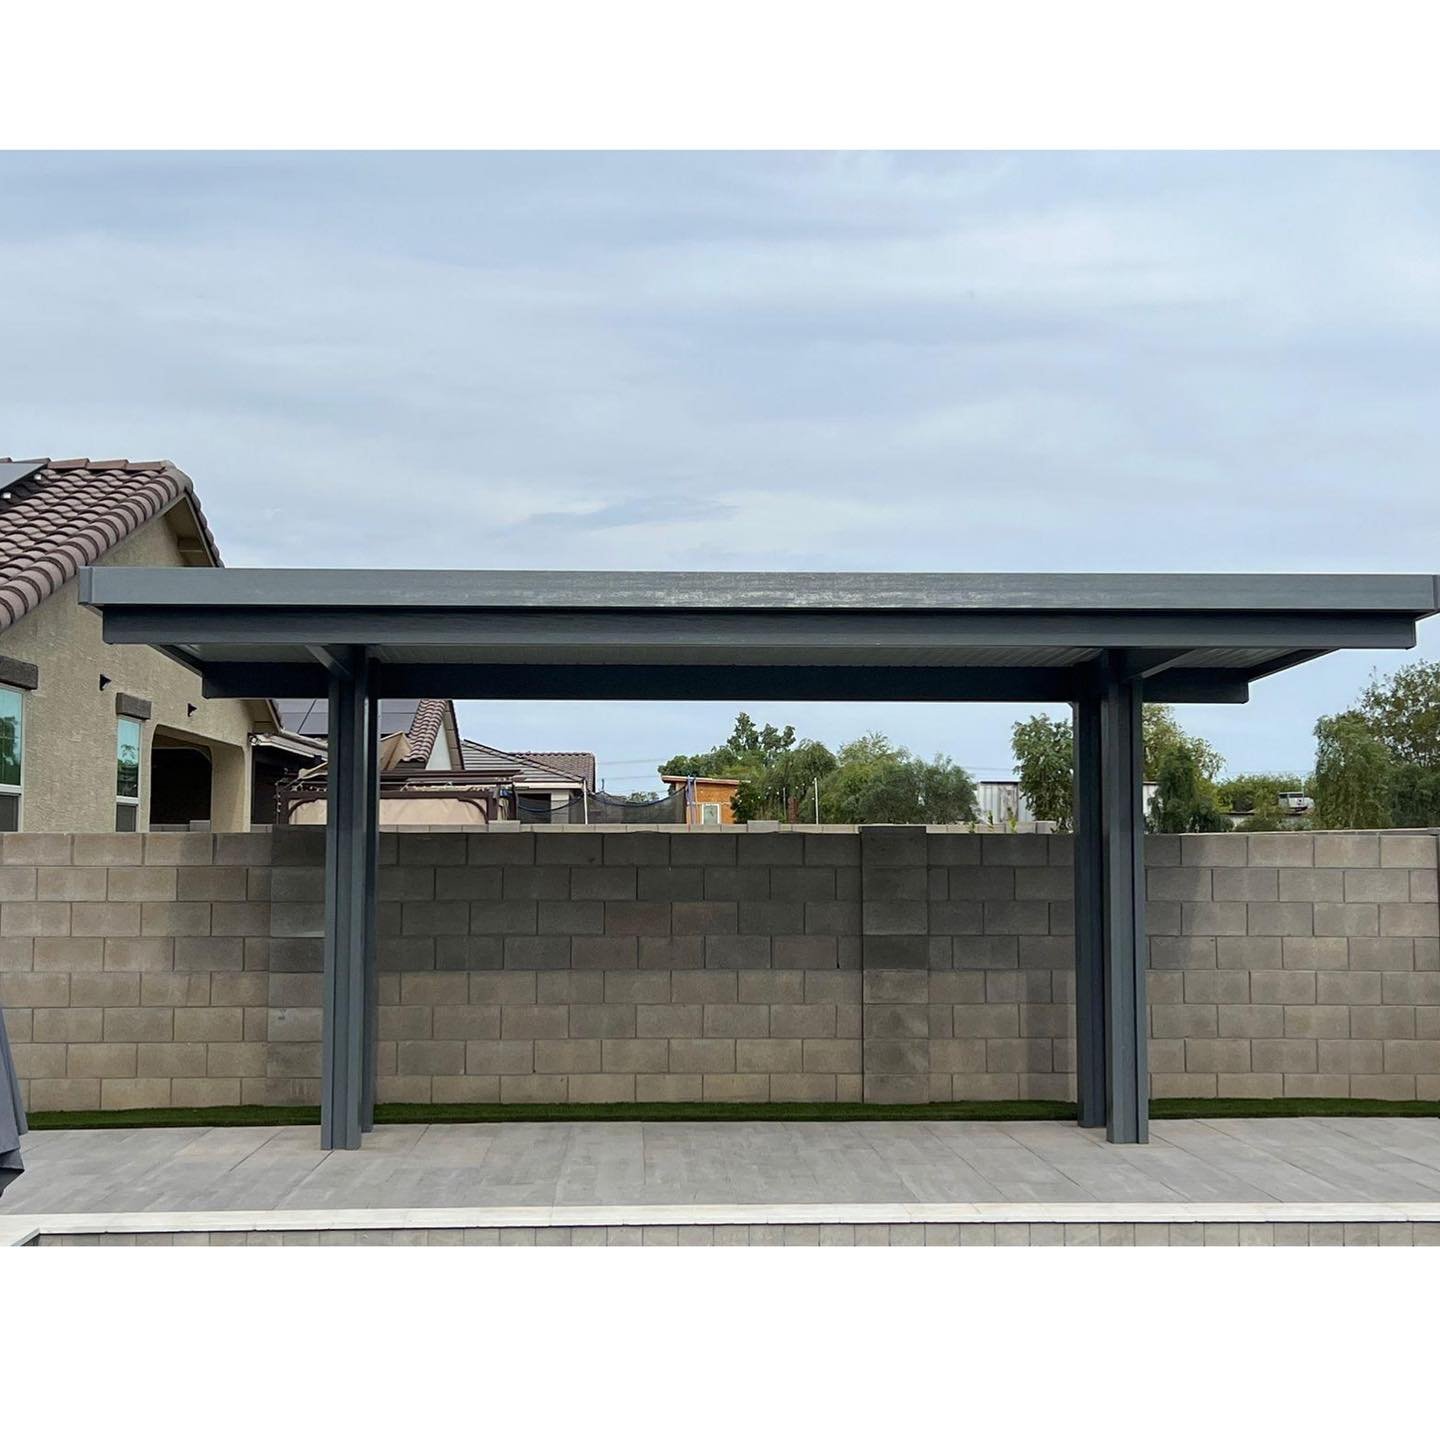 Solid Flat Pan Cover Services, Outshine Patio Cover near Gilbert AZ